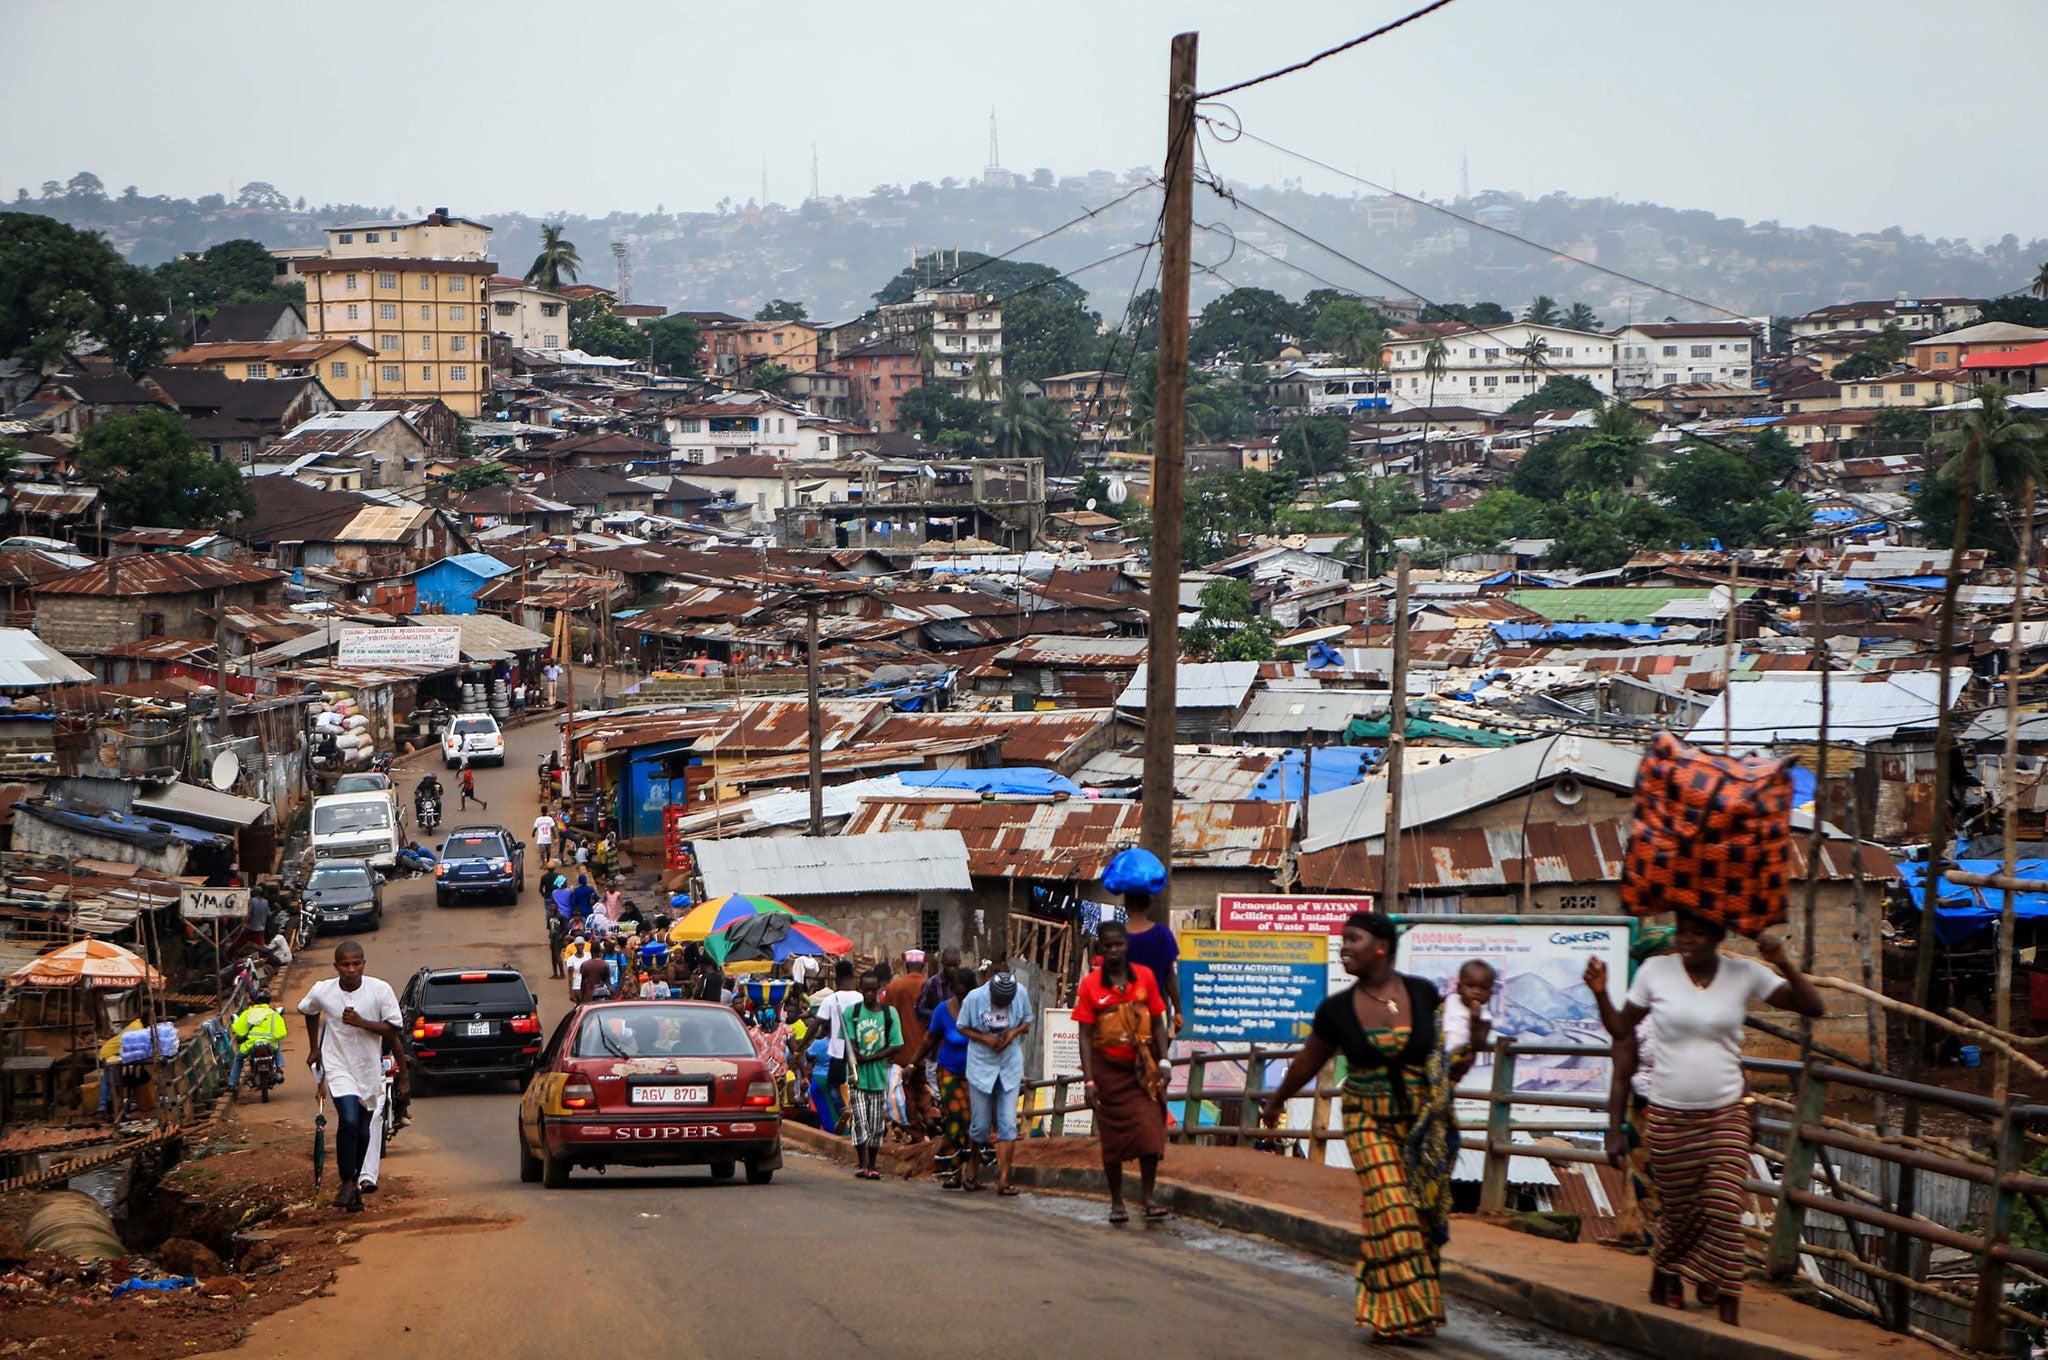 Day-to-day life in a slum in the Ebola-affected Freetown, capital of Sierra Leone, where mining had been thriving before the outbreak